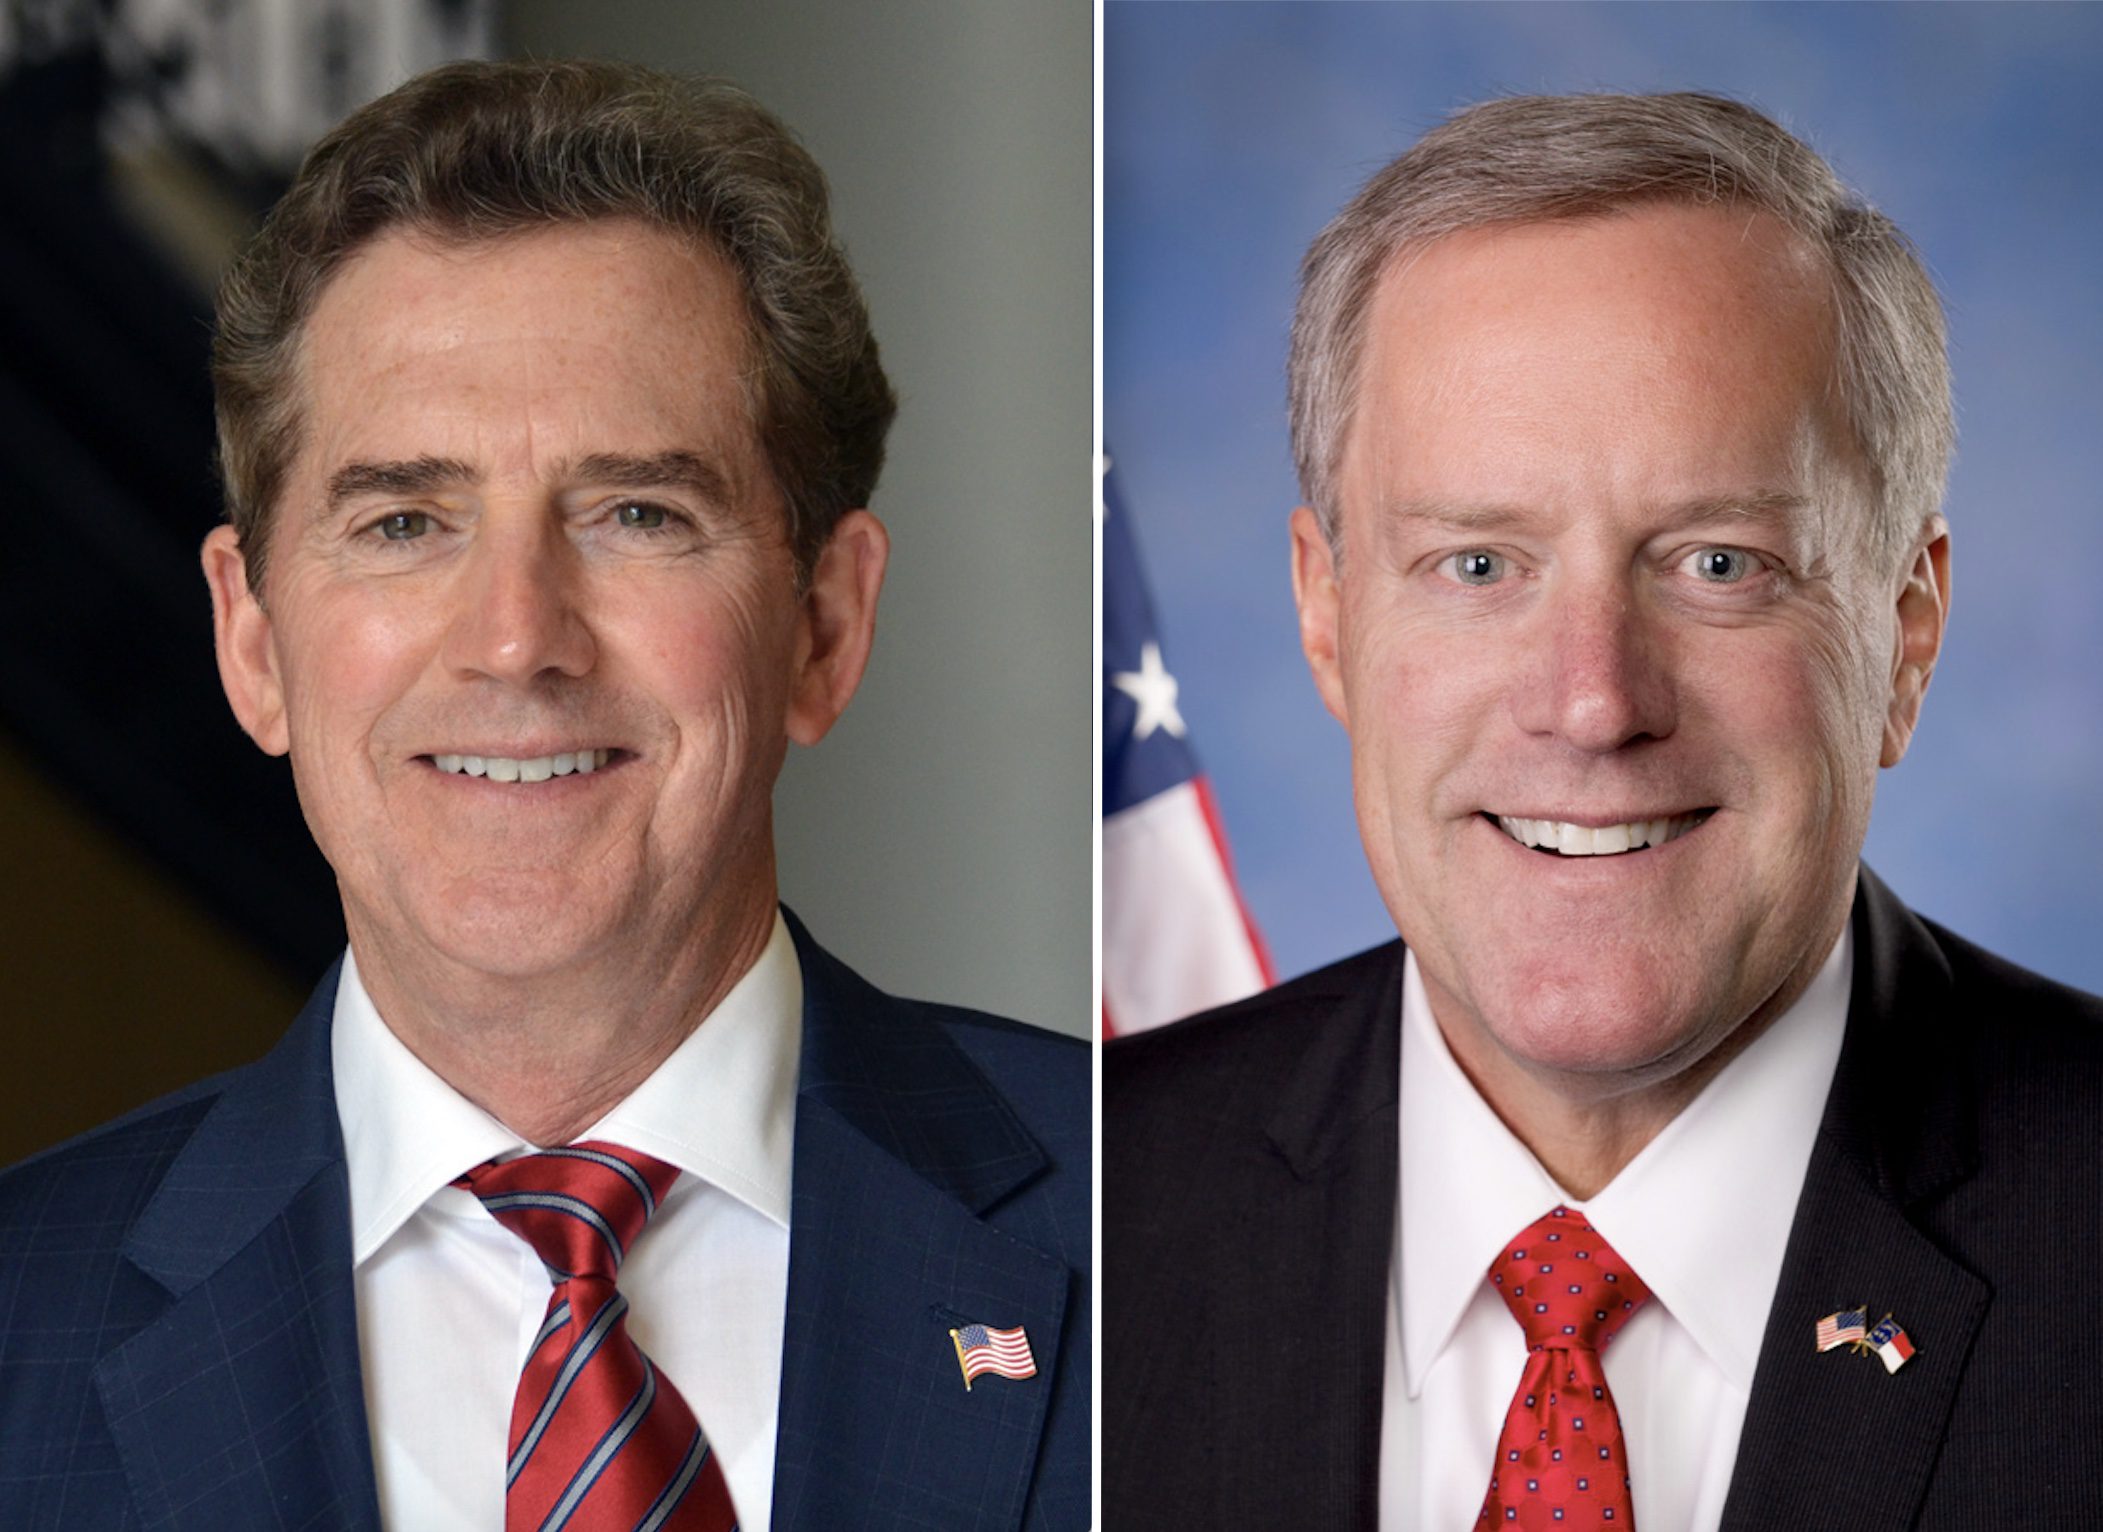 Jim DeMint and Mark Meadows to Headline TAC Crony Capitalism Conference